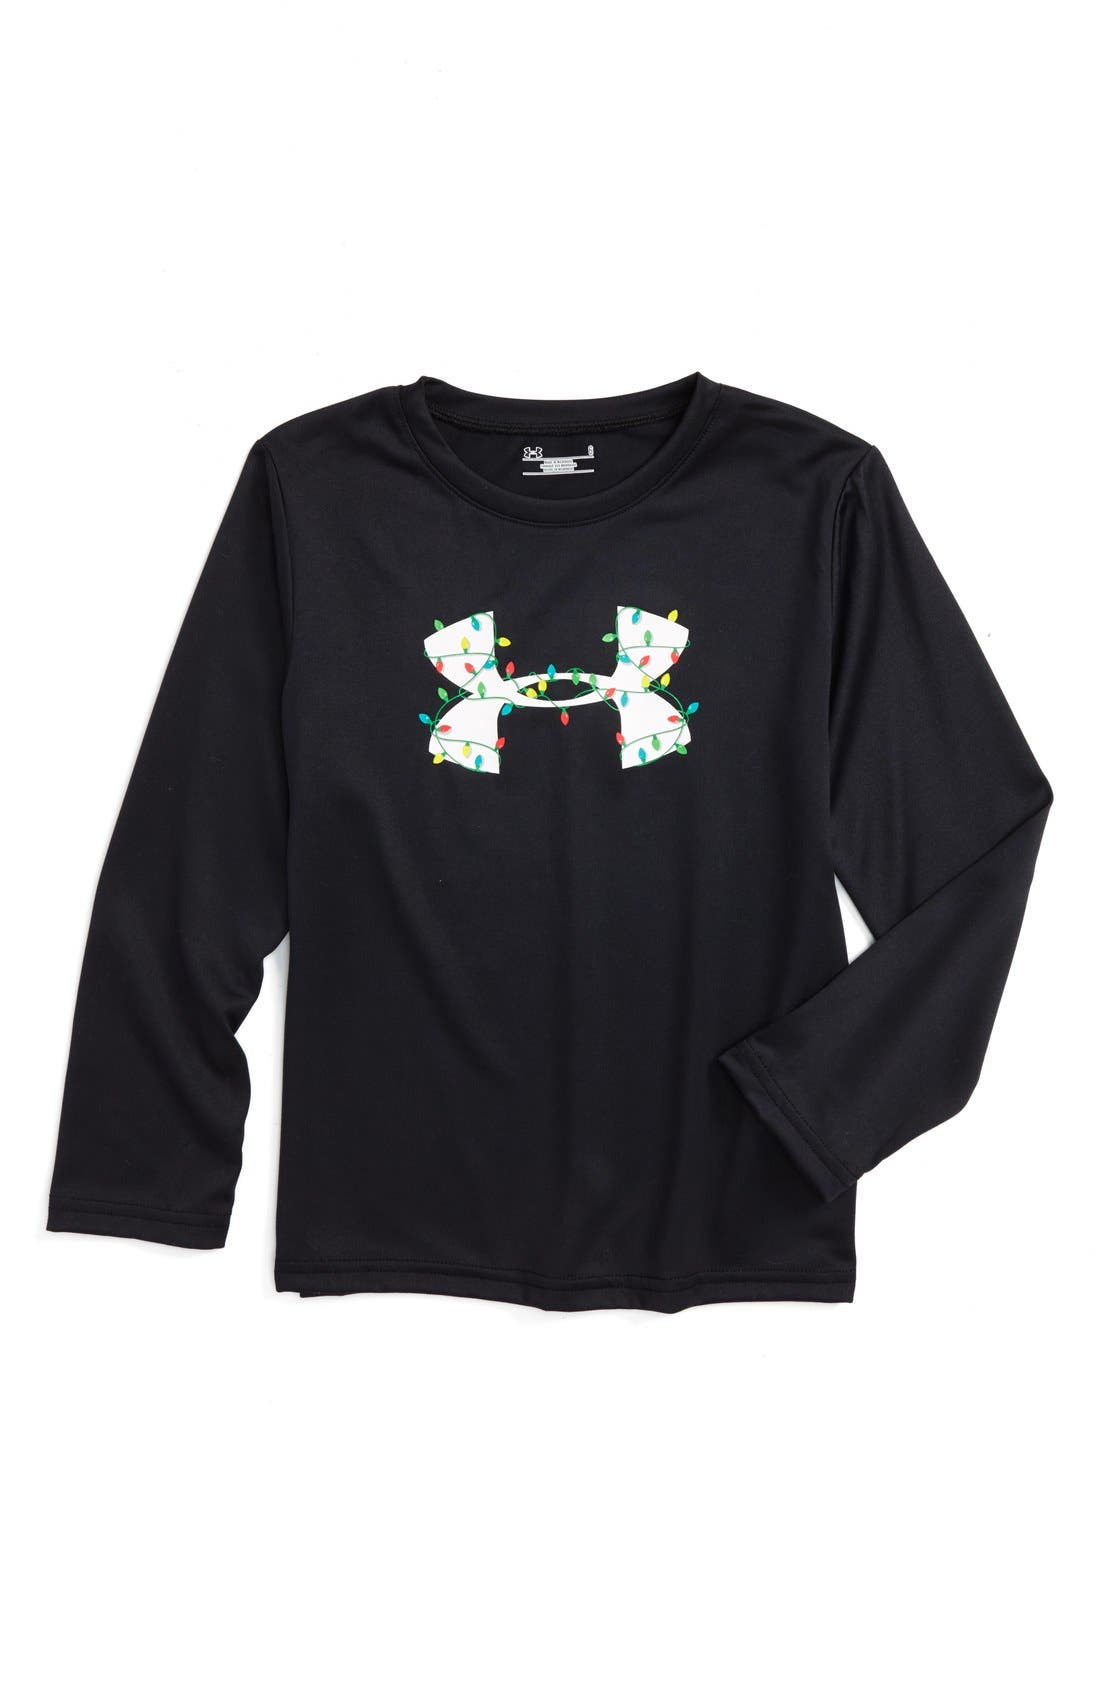 Under Armour Holiday Lights Graphic T 